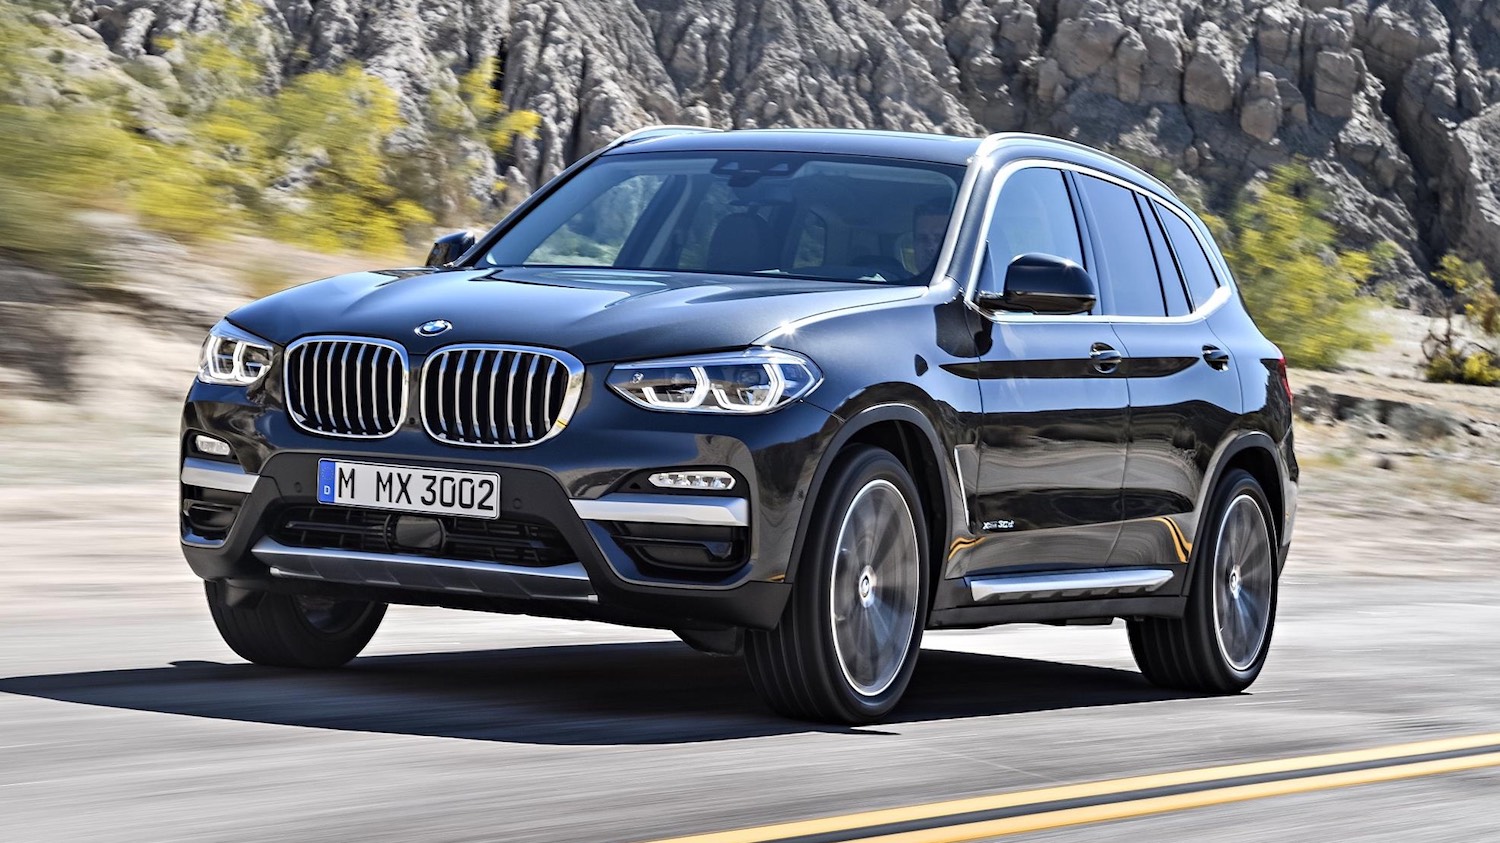 Neil Lyndon takes a spin in the latest BMW X3 M-Sport 9